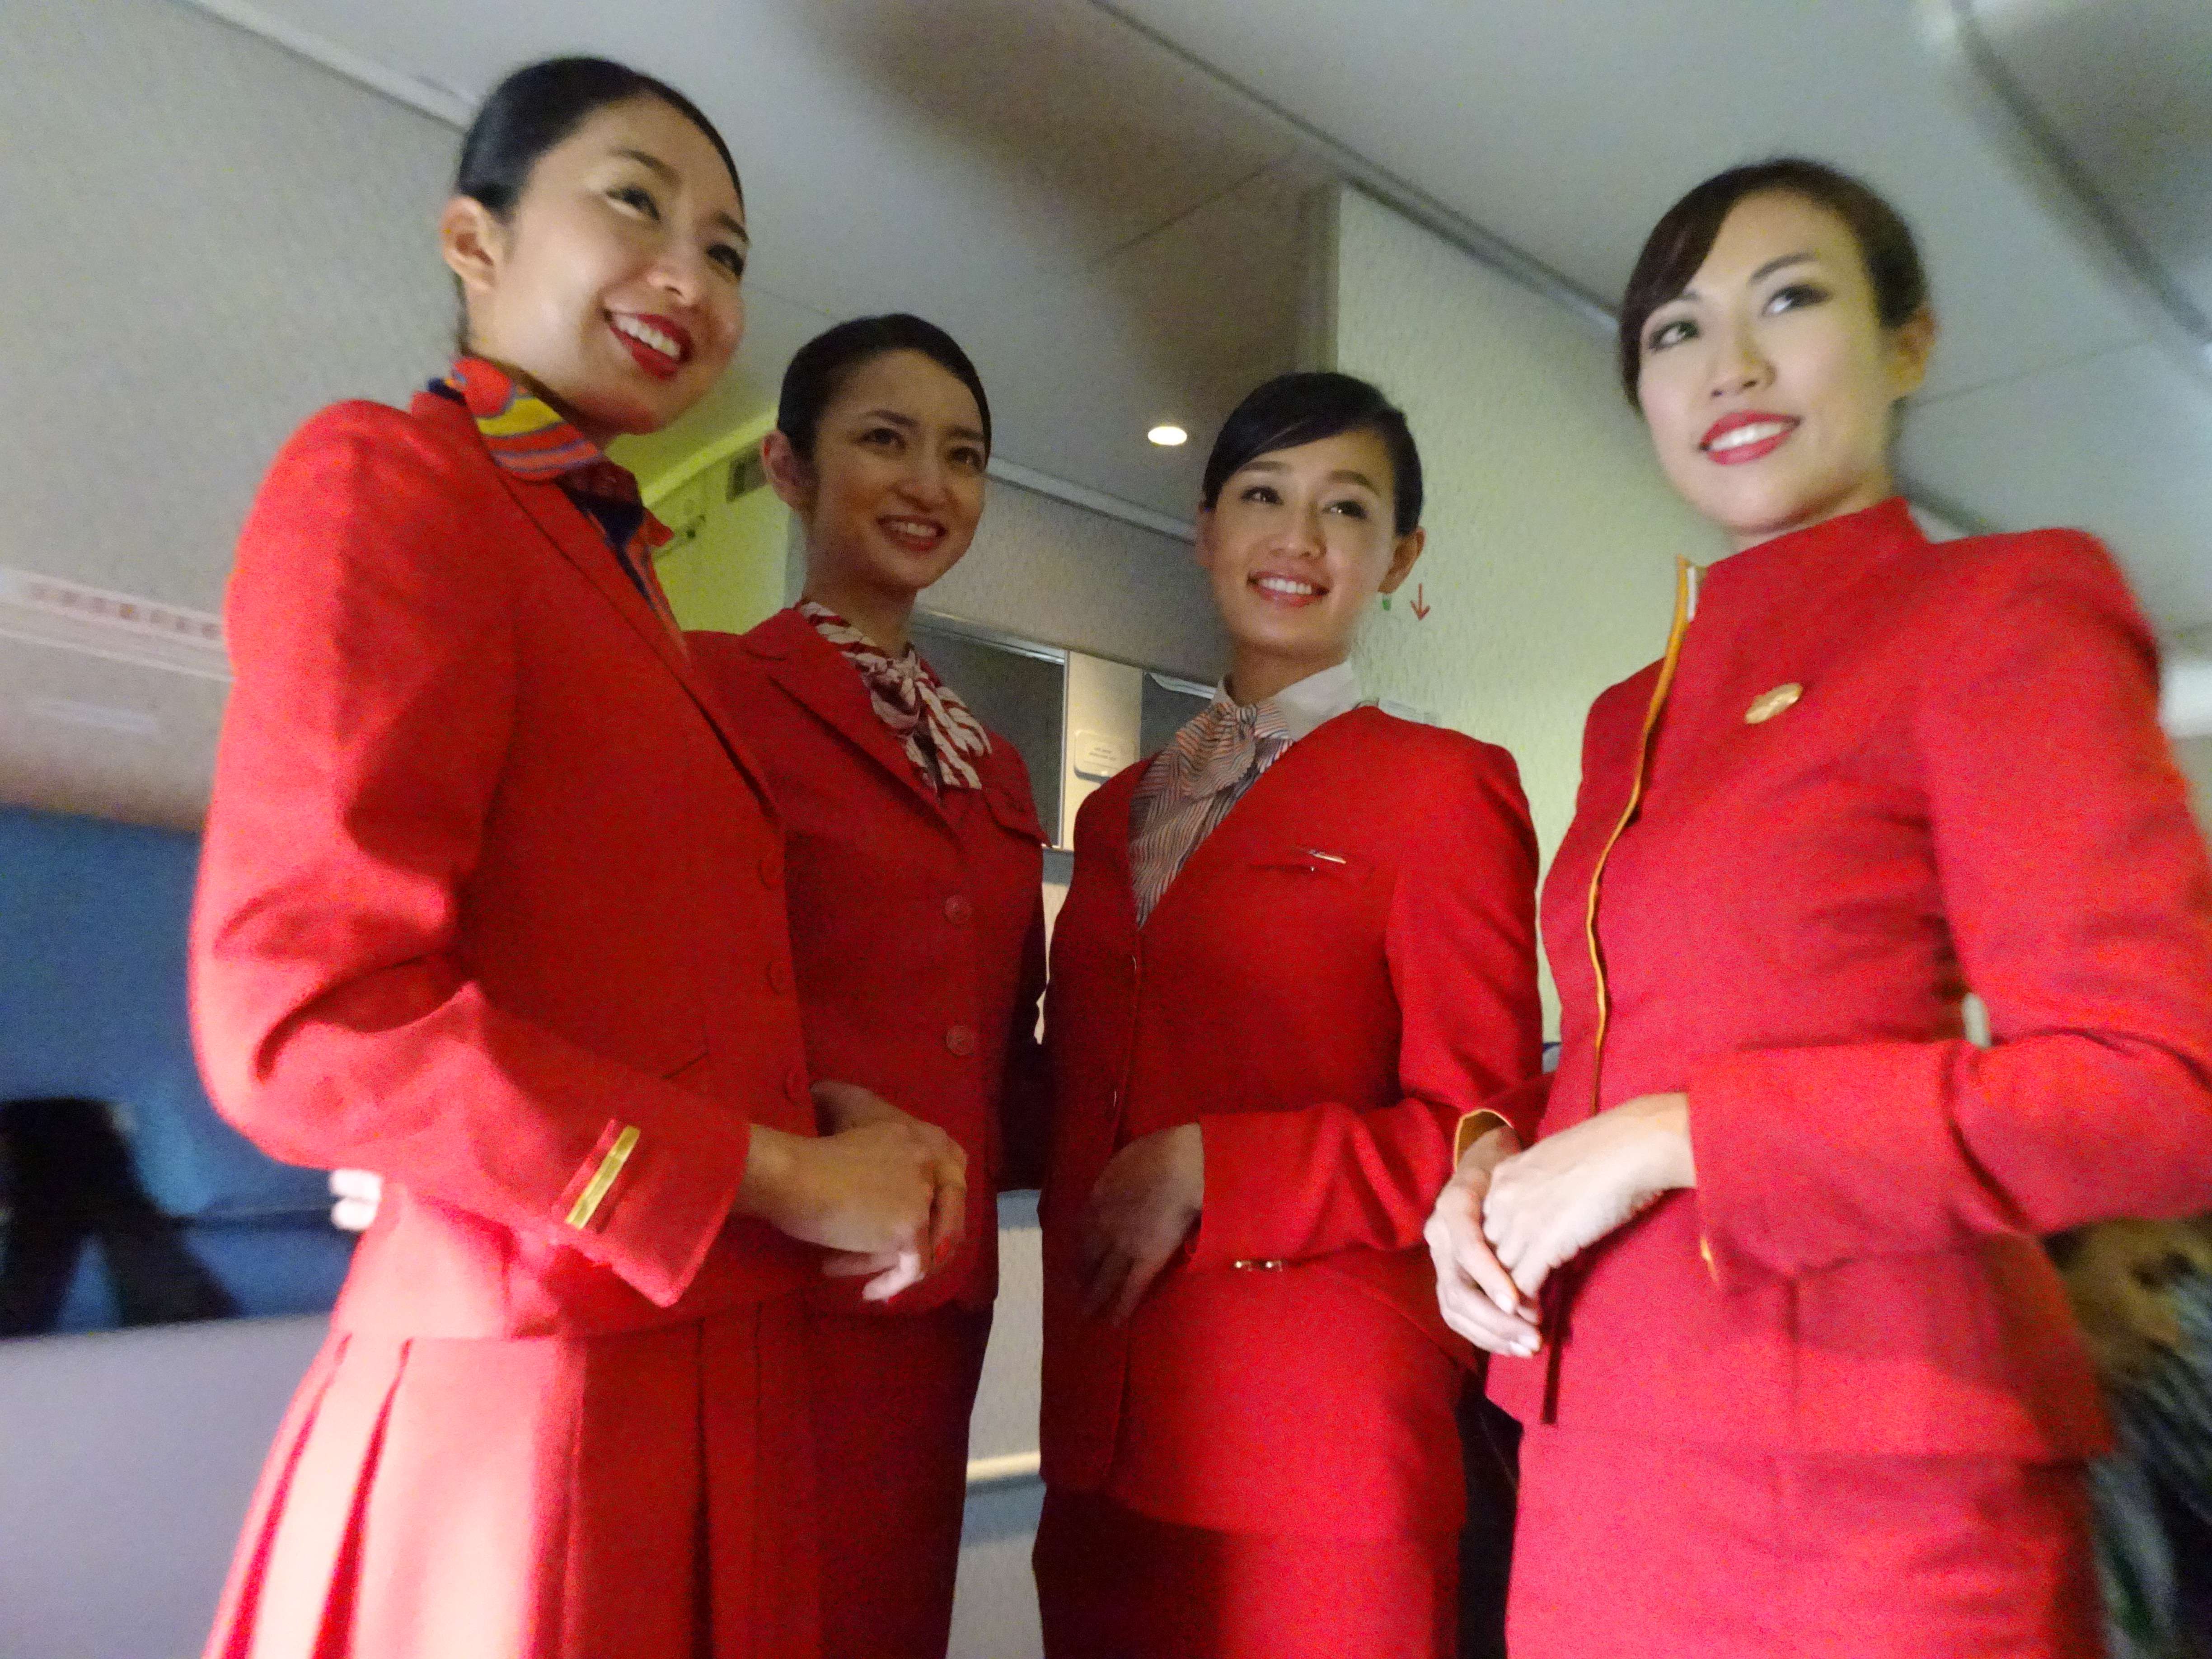 There is no reason why Cathay Pacific cabin crew cannot work past 55, especially when you consider that the average lifespan for women in Hong Kong is over 87 years. Photo: Red Door News